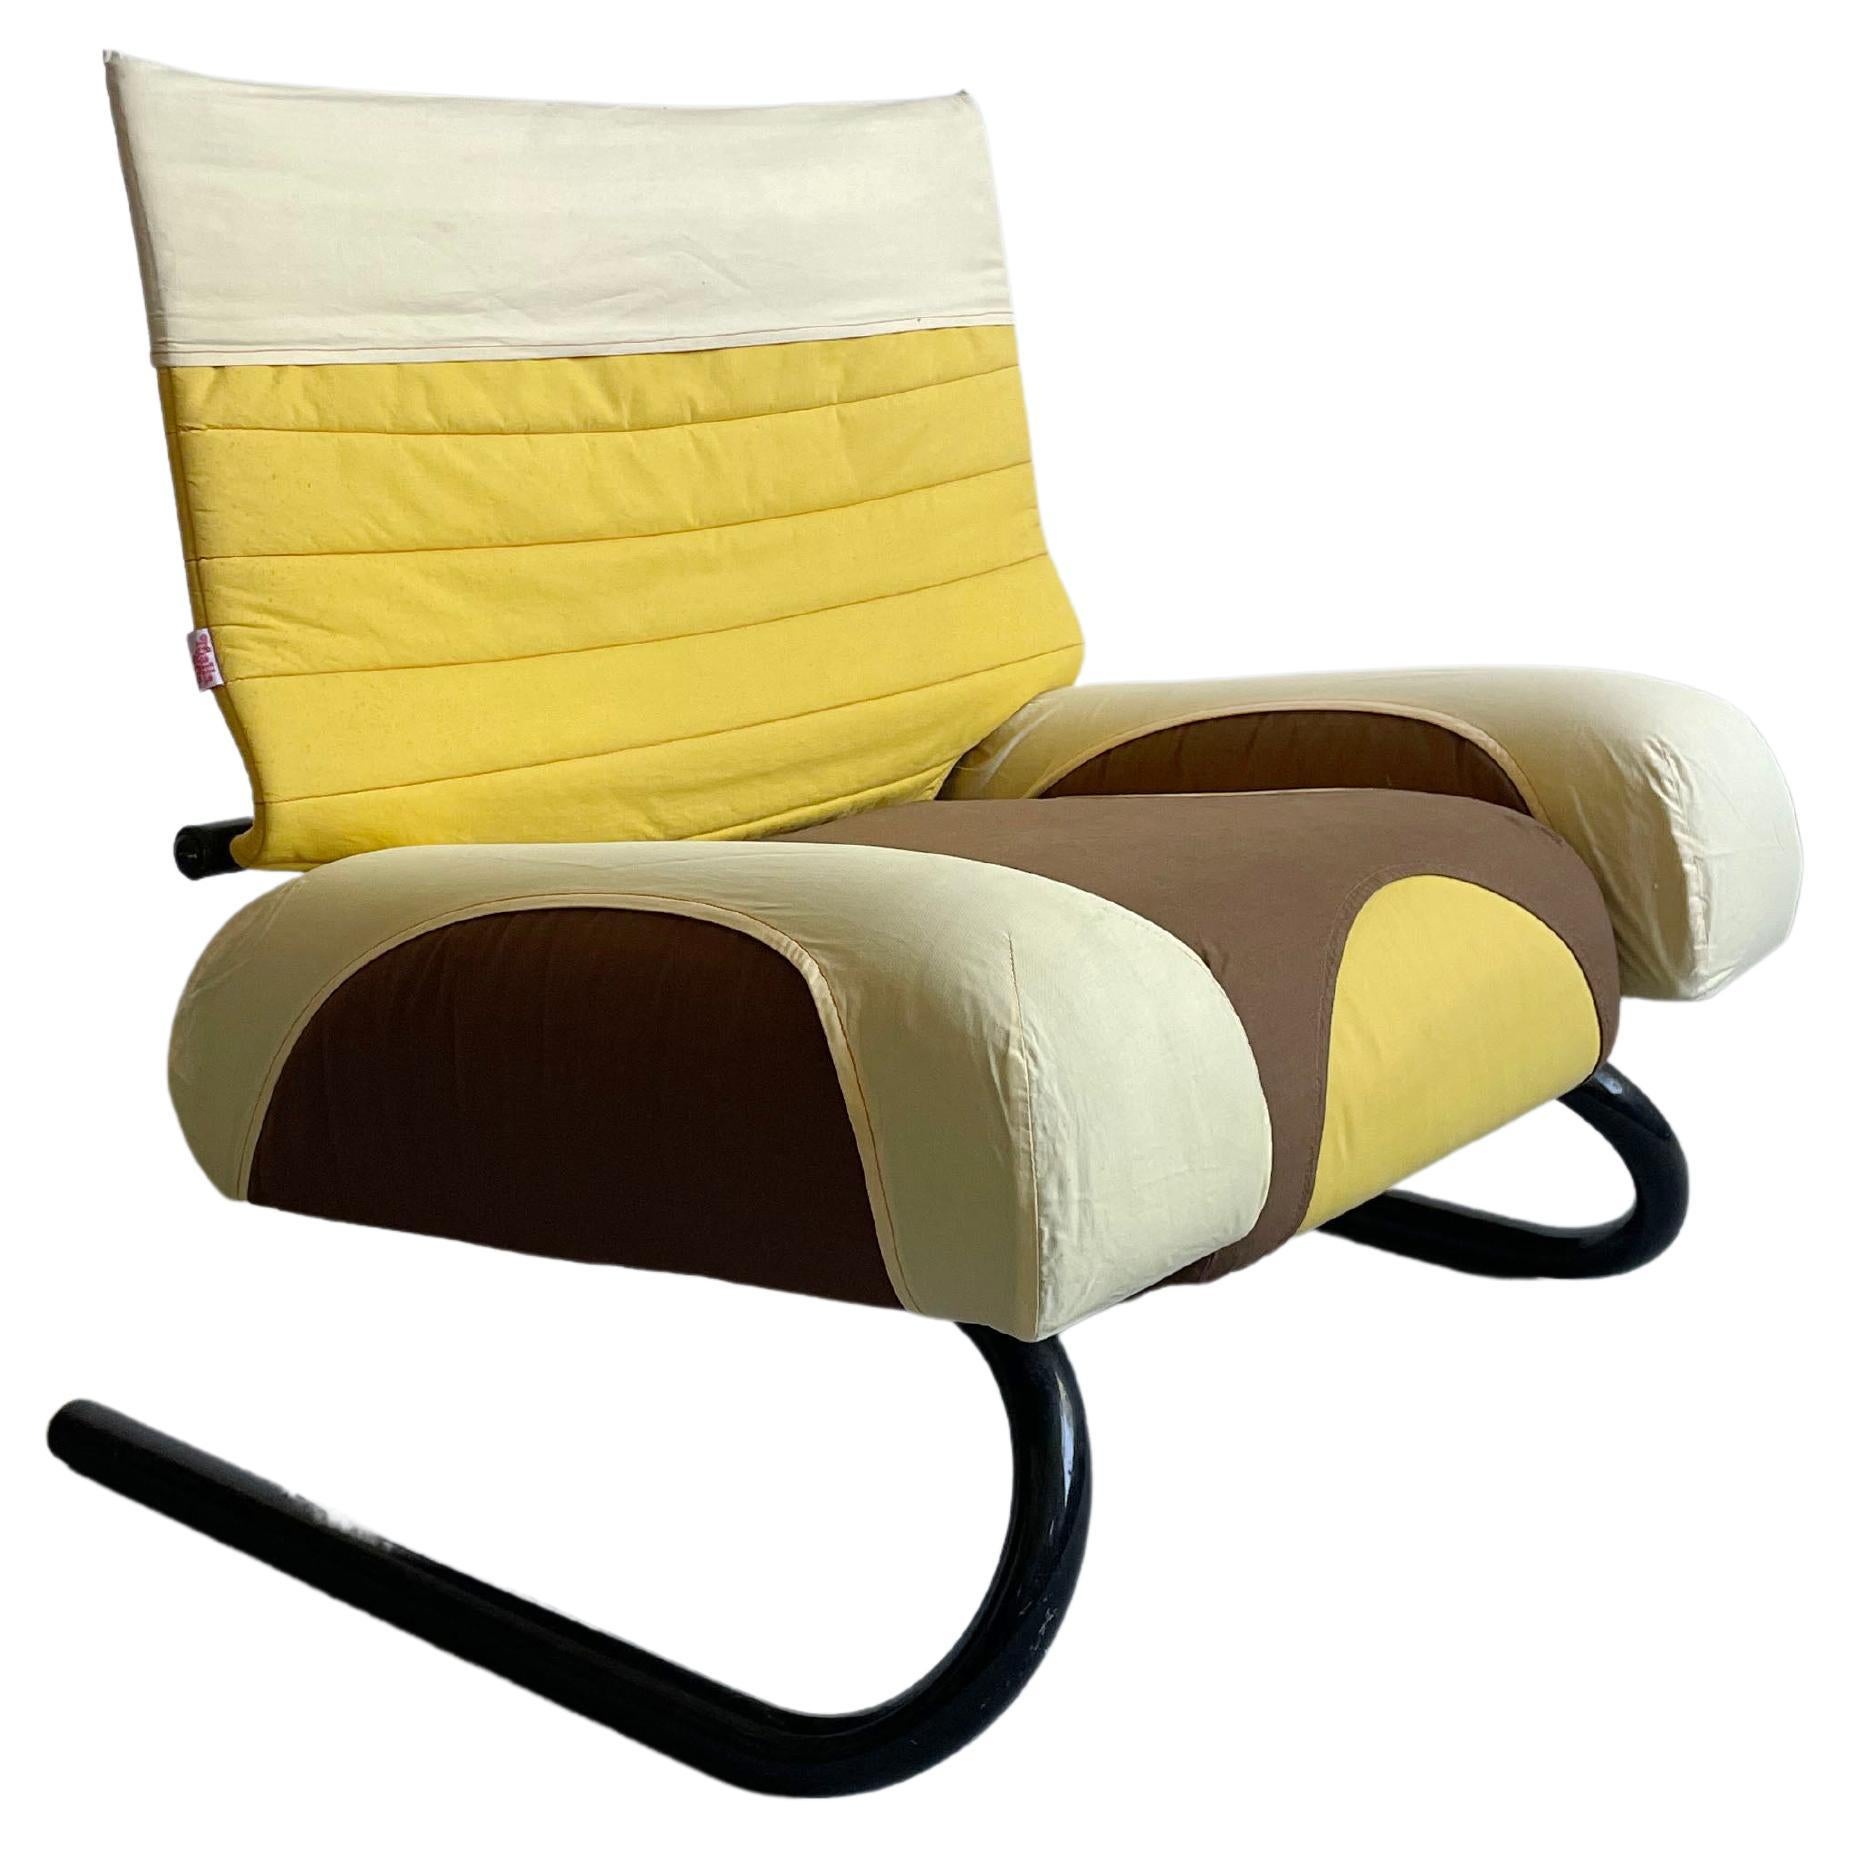 Postmodern 'Peter Pan' Lounge Chair, Michele De Lucchi for Thalia&Co, Italy 1982 For Sale